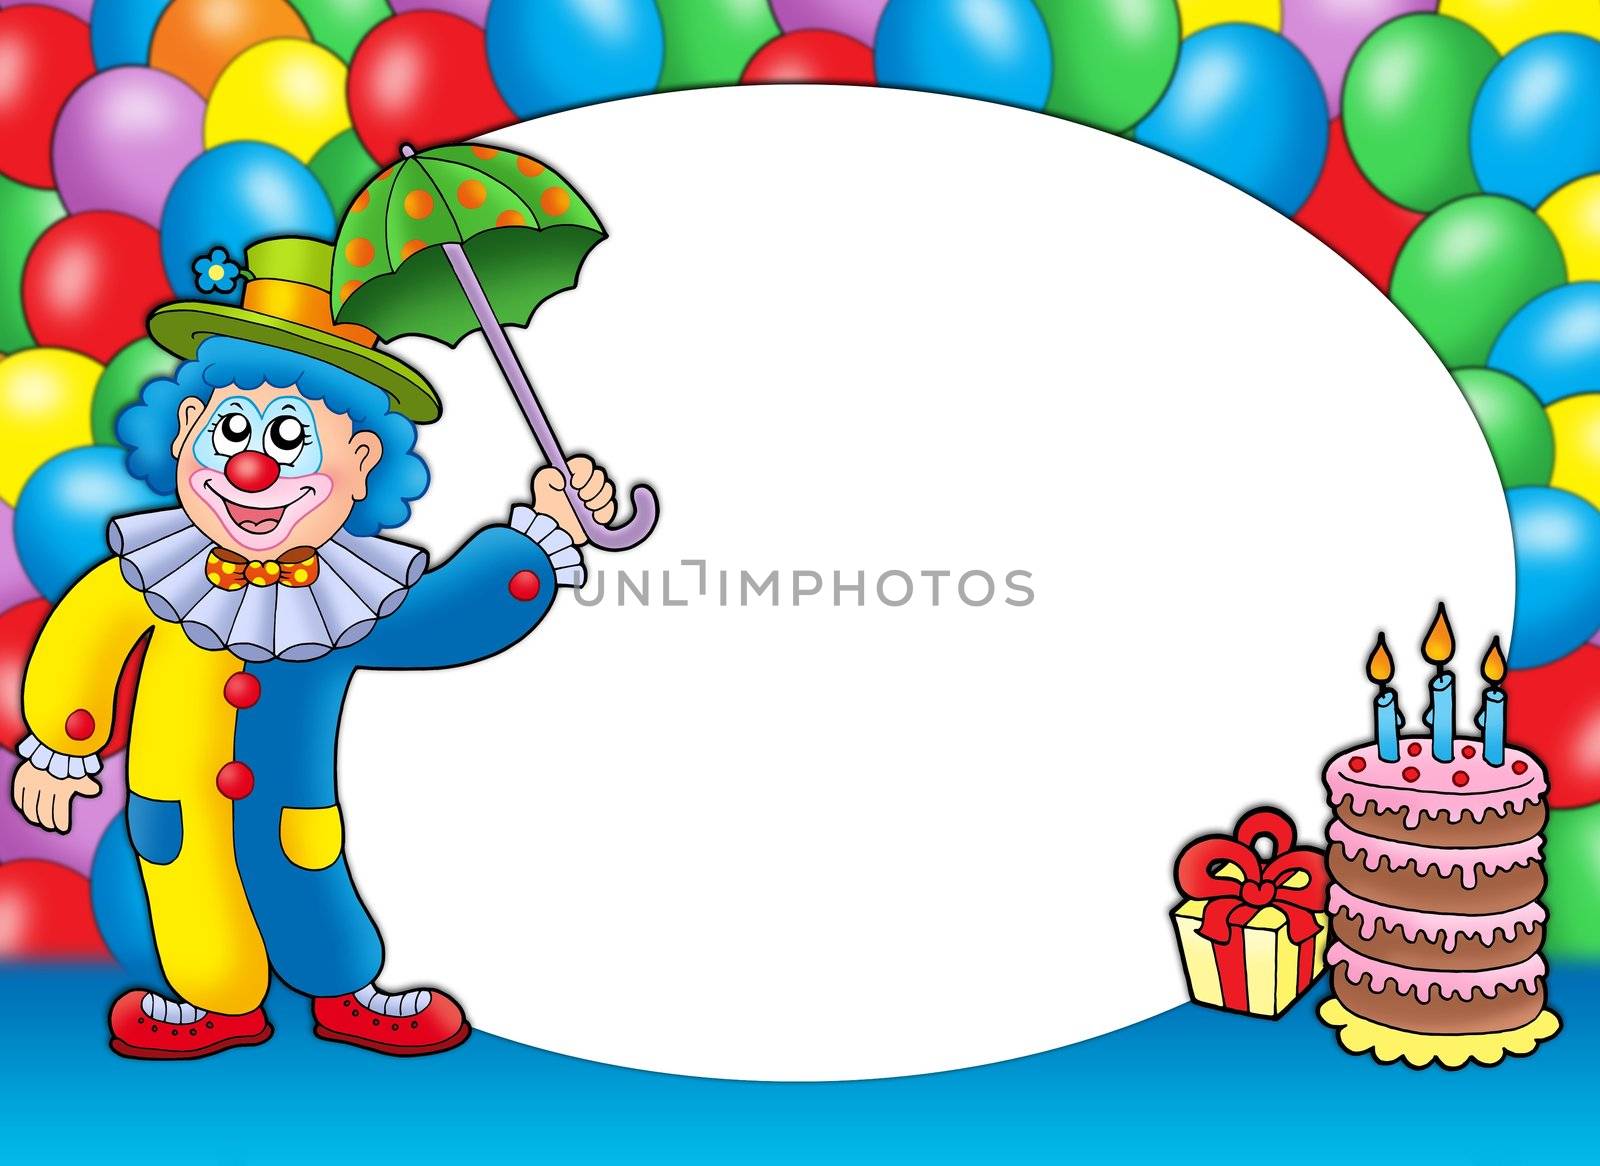 Round frame with clown and balloons - color illustration.